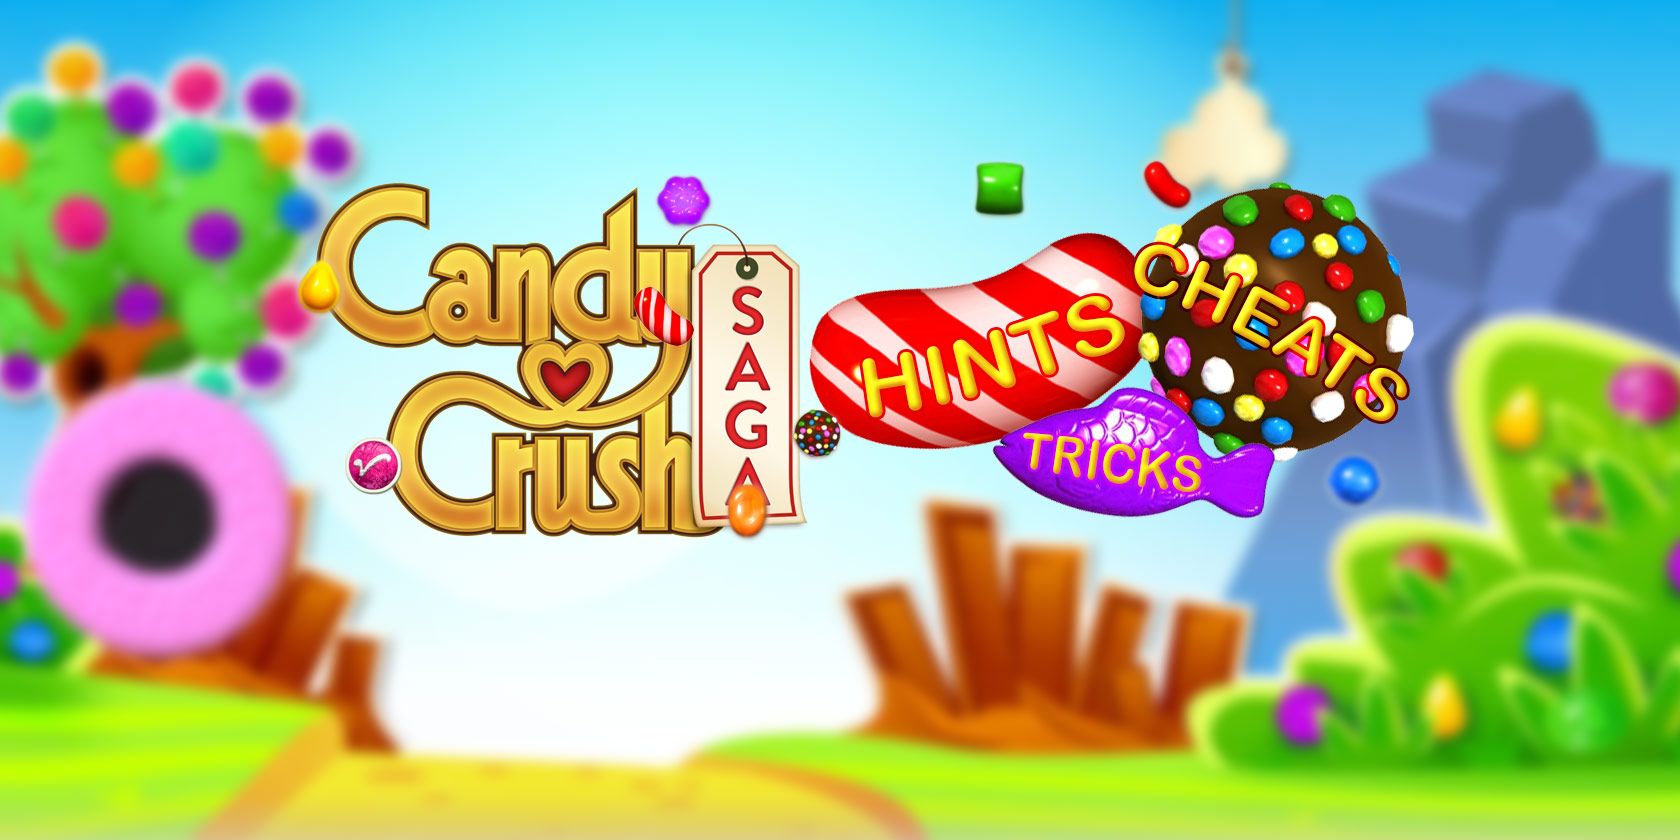 unlimited lives in candy crush saga facebook